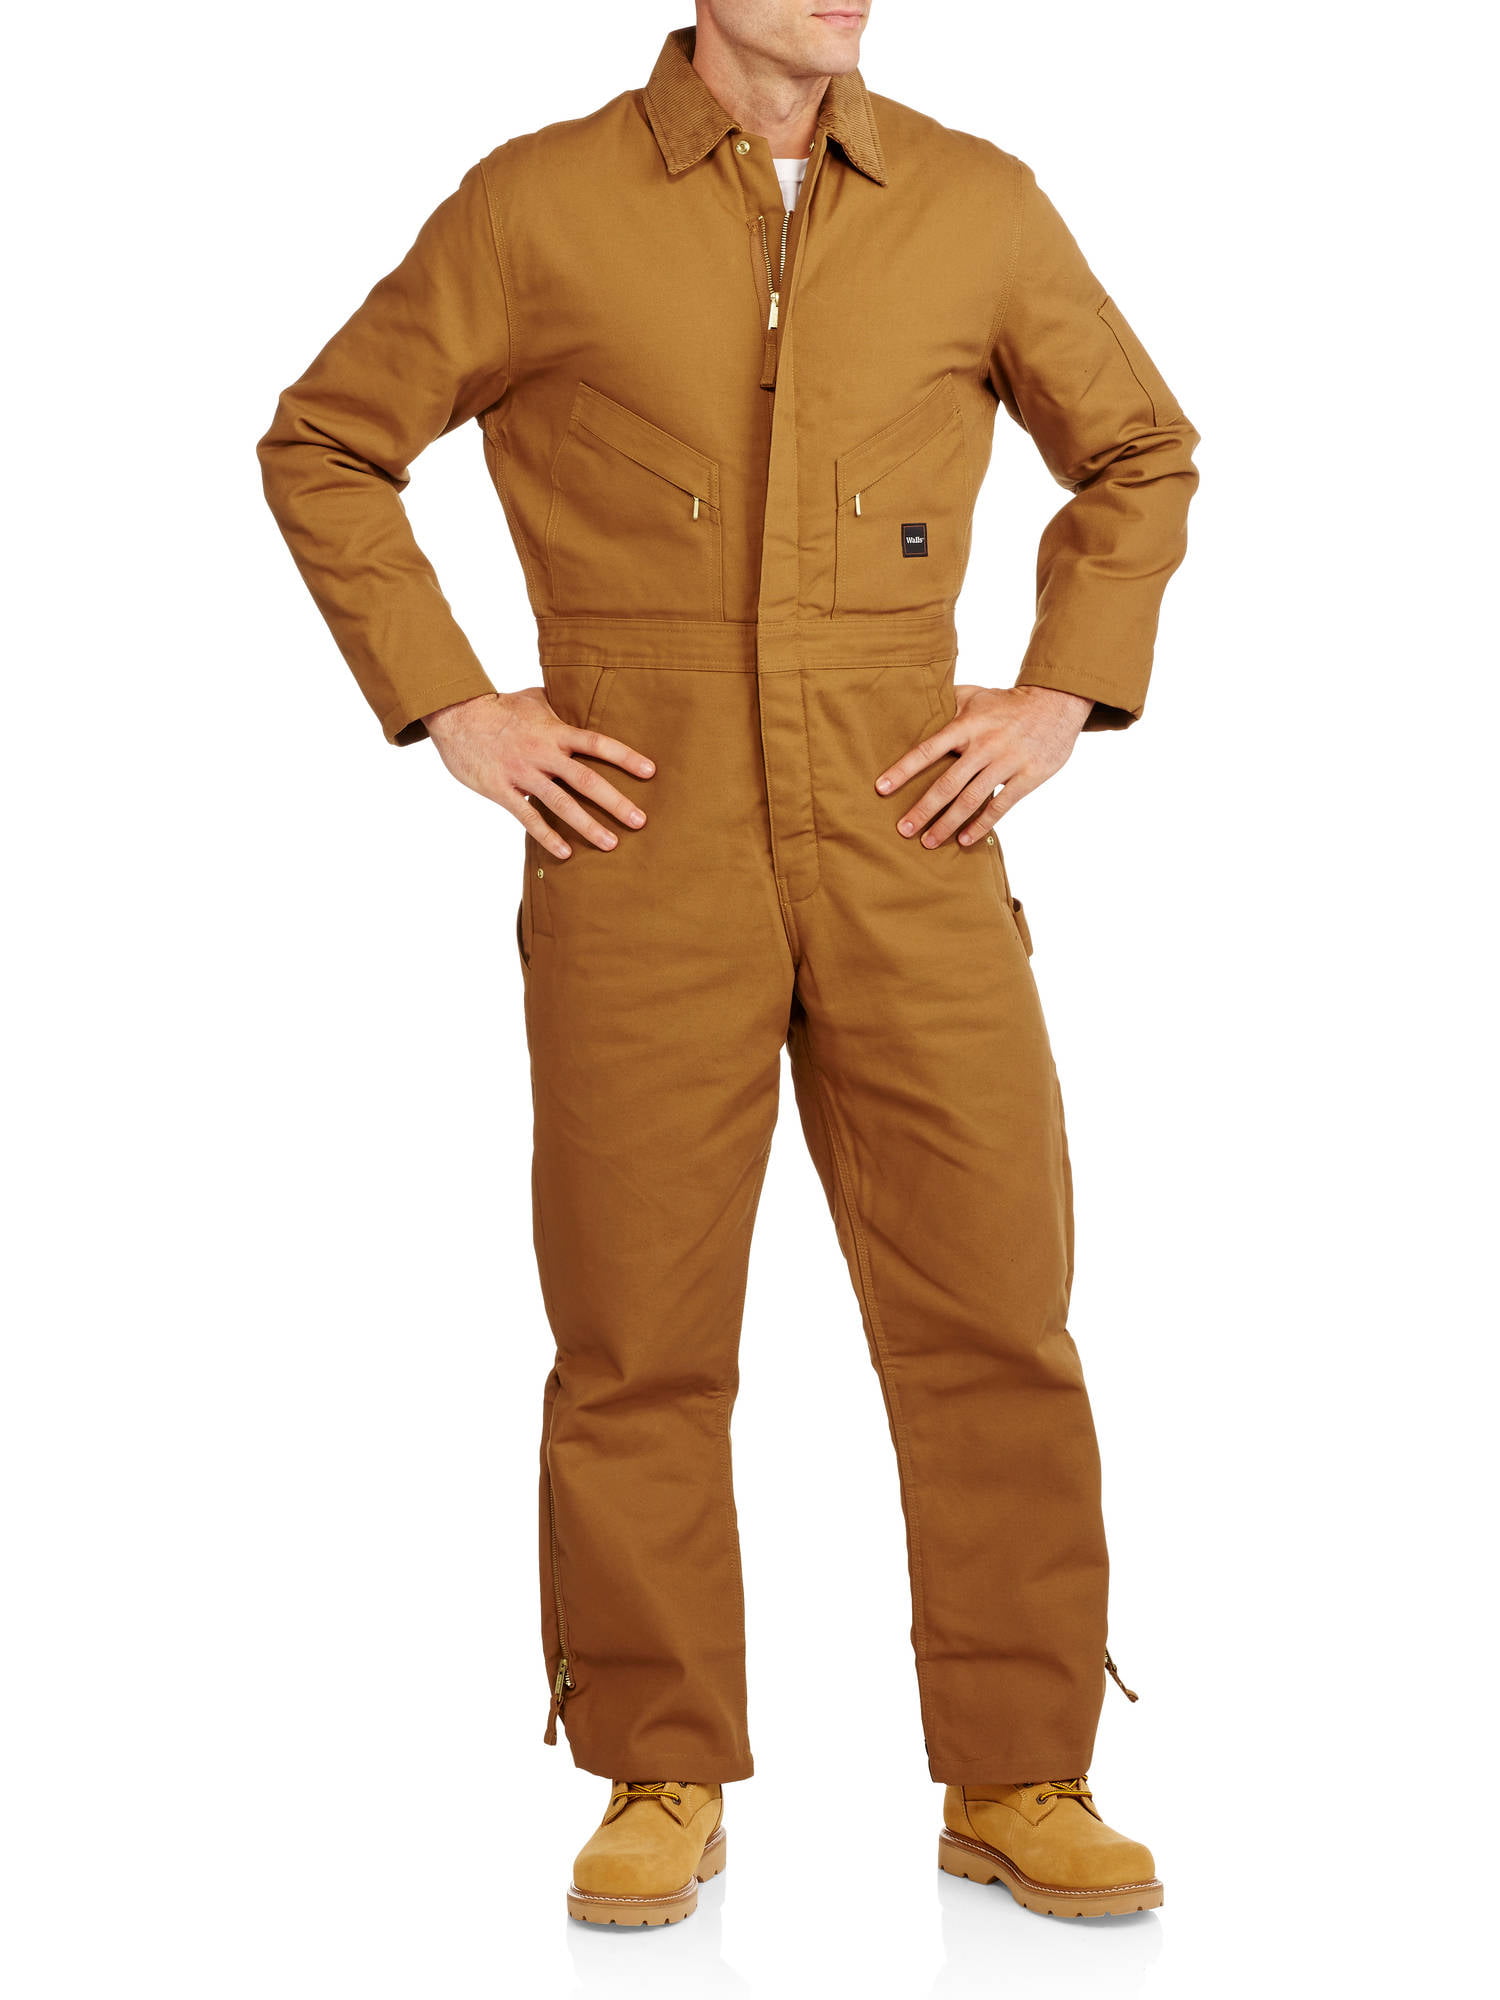 Size XL Tall Walls Plano Insulated Brown Duck Coveralls